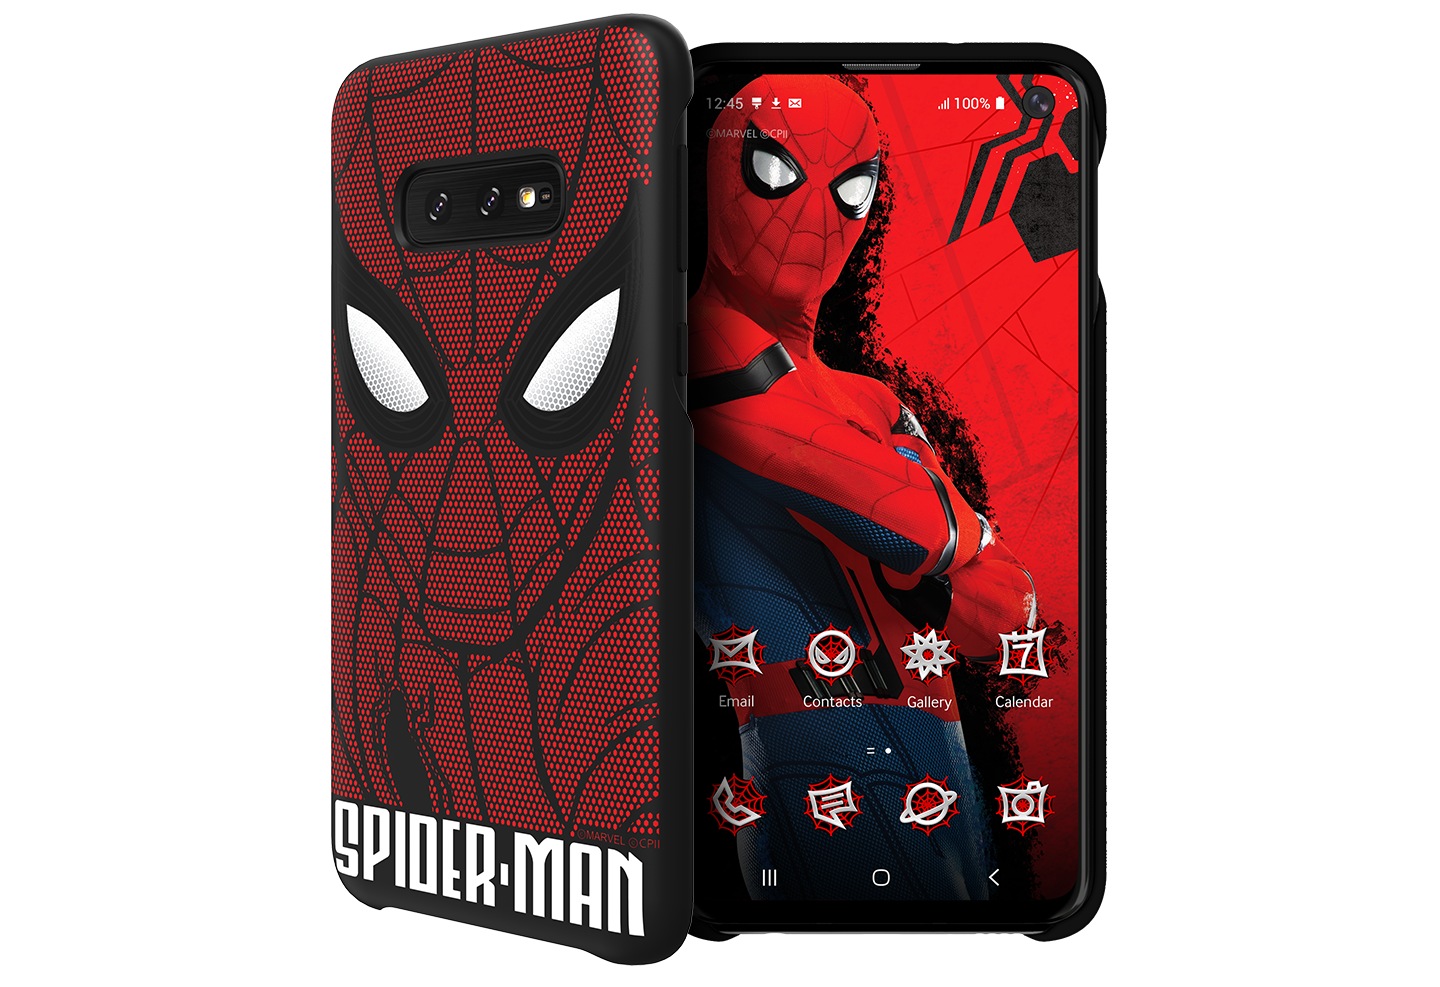 Meet the Spider-Man Far From Home edition with Galaxy Friends!